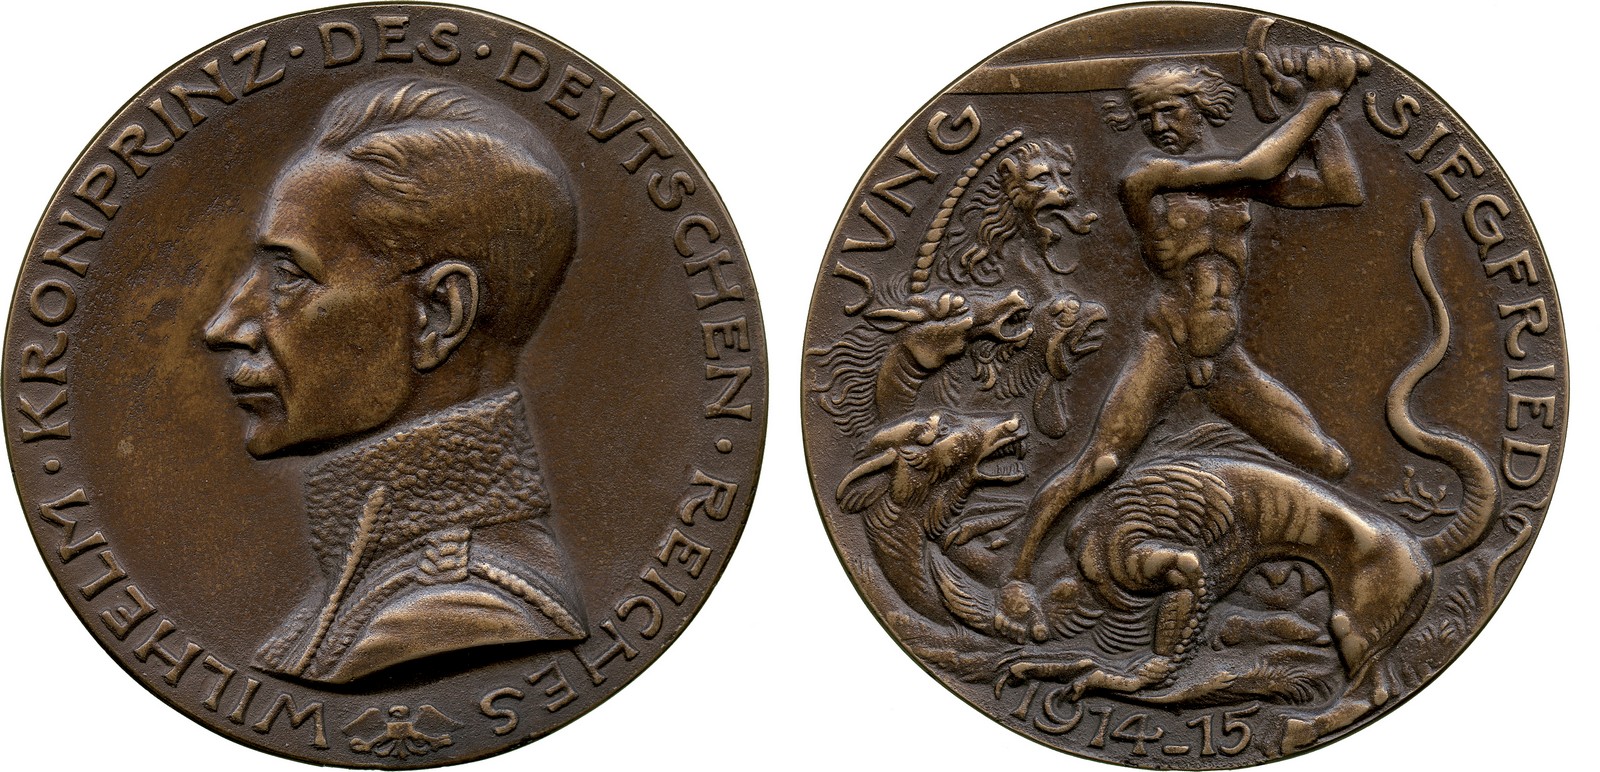 COMMEMORATIVE MEDALS, WORLD MEDALS, Medals of the Axis, Germany, Crown Prince Wilhelm (1882-1951),